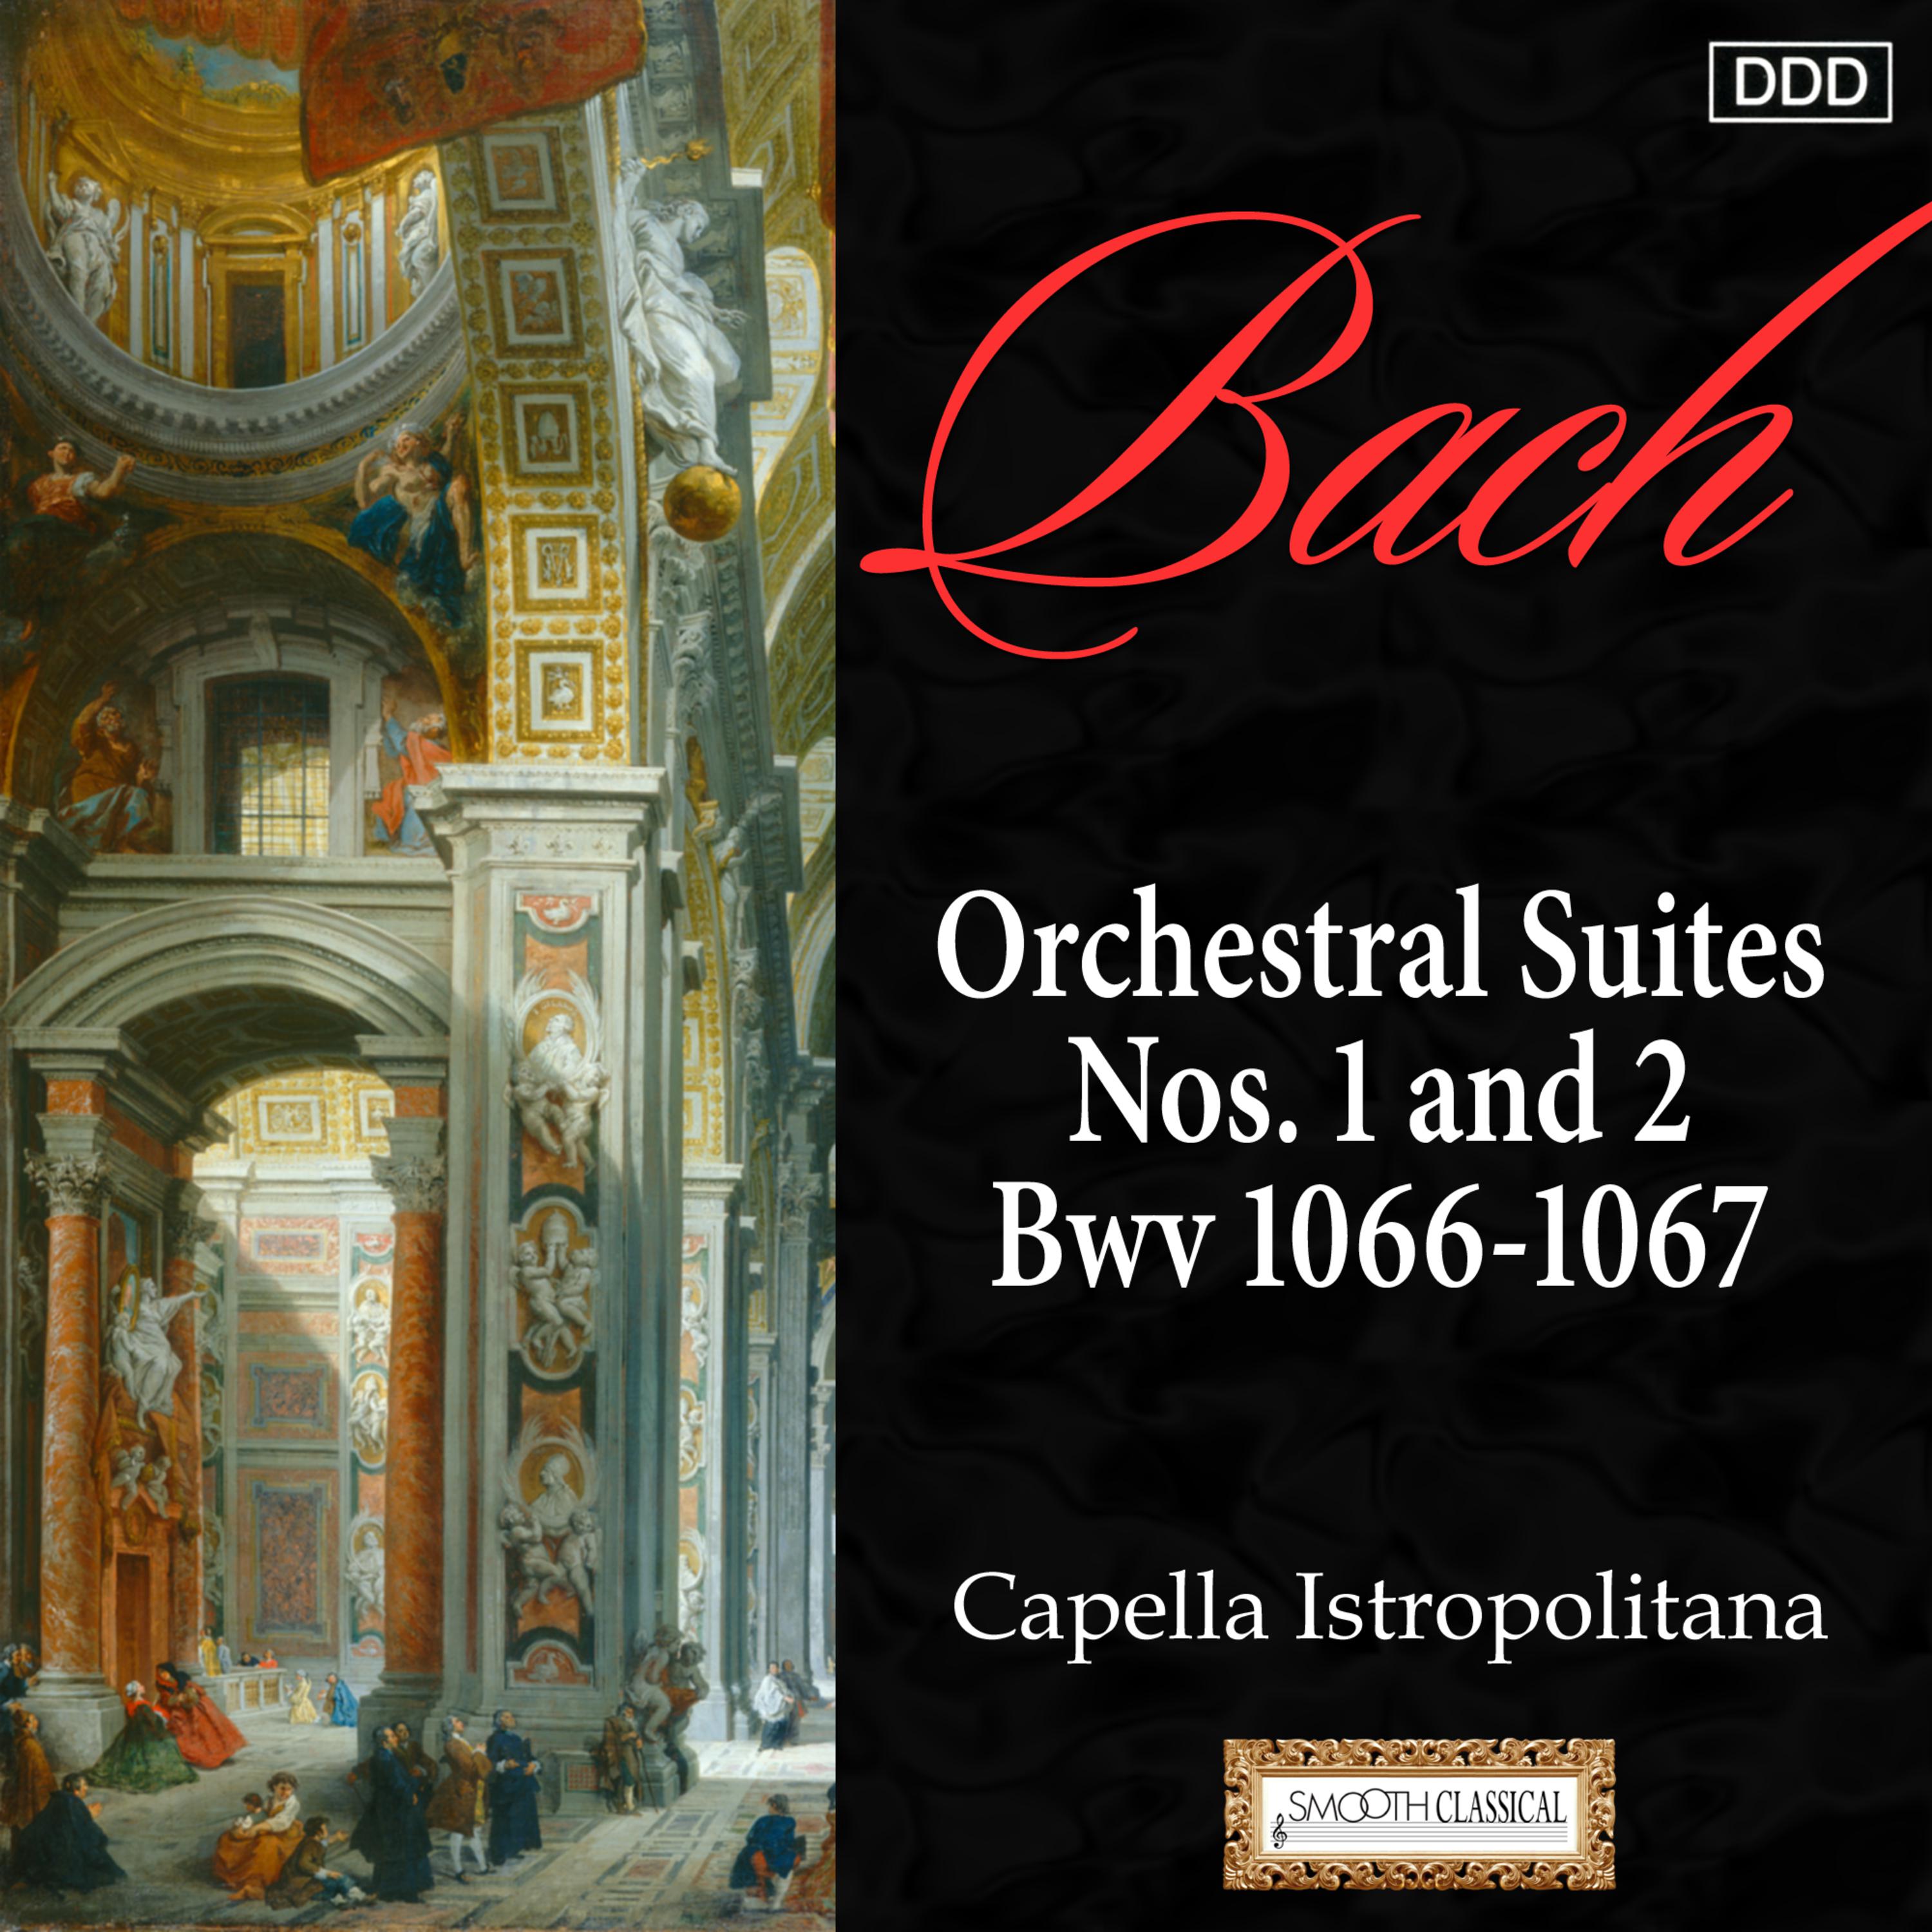 Orchestral Suite No. 1 in C Major, BWV 1066: V. Menuet I and II